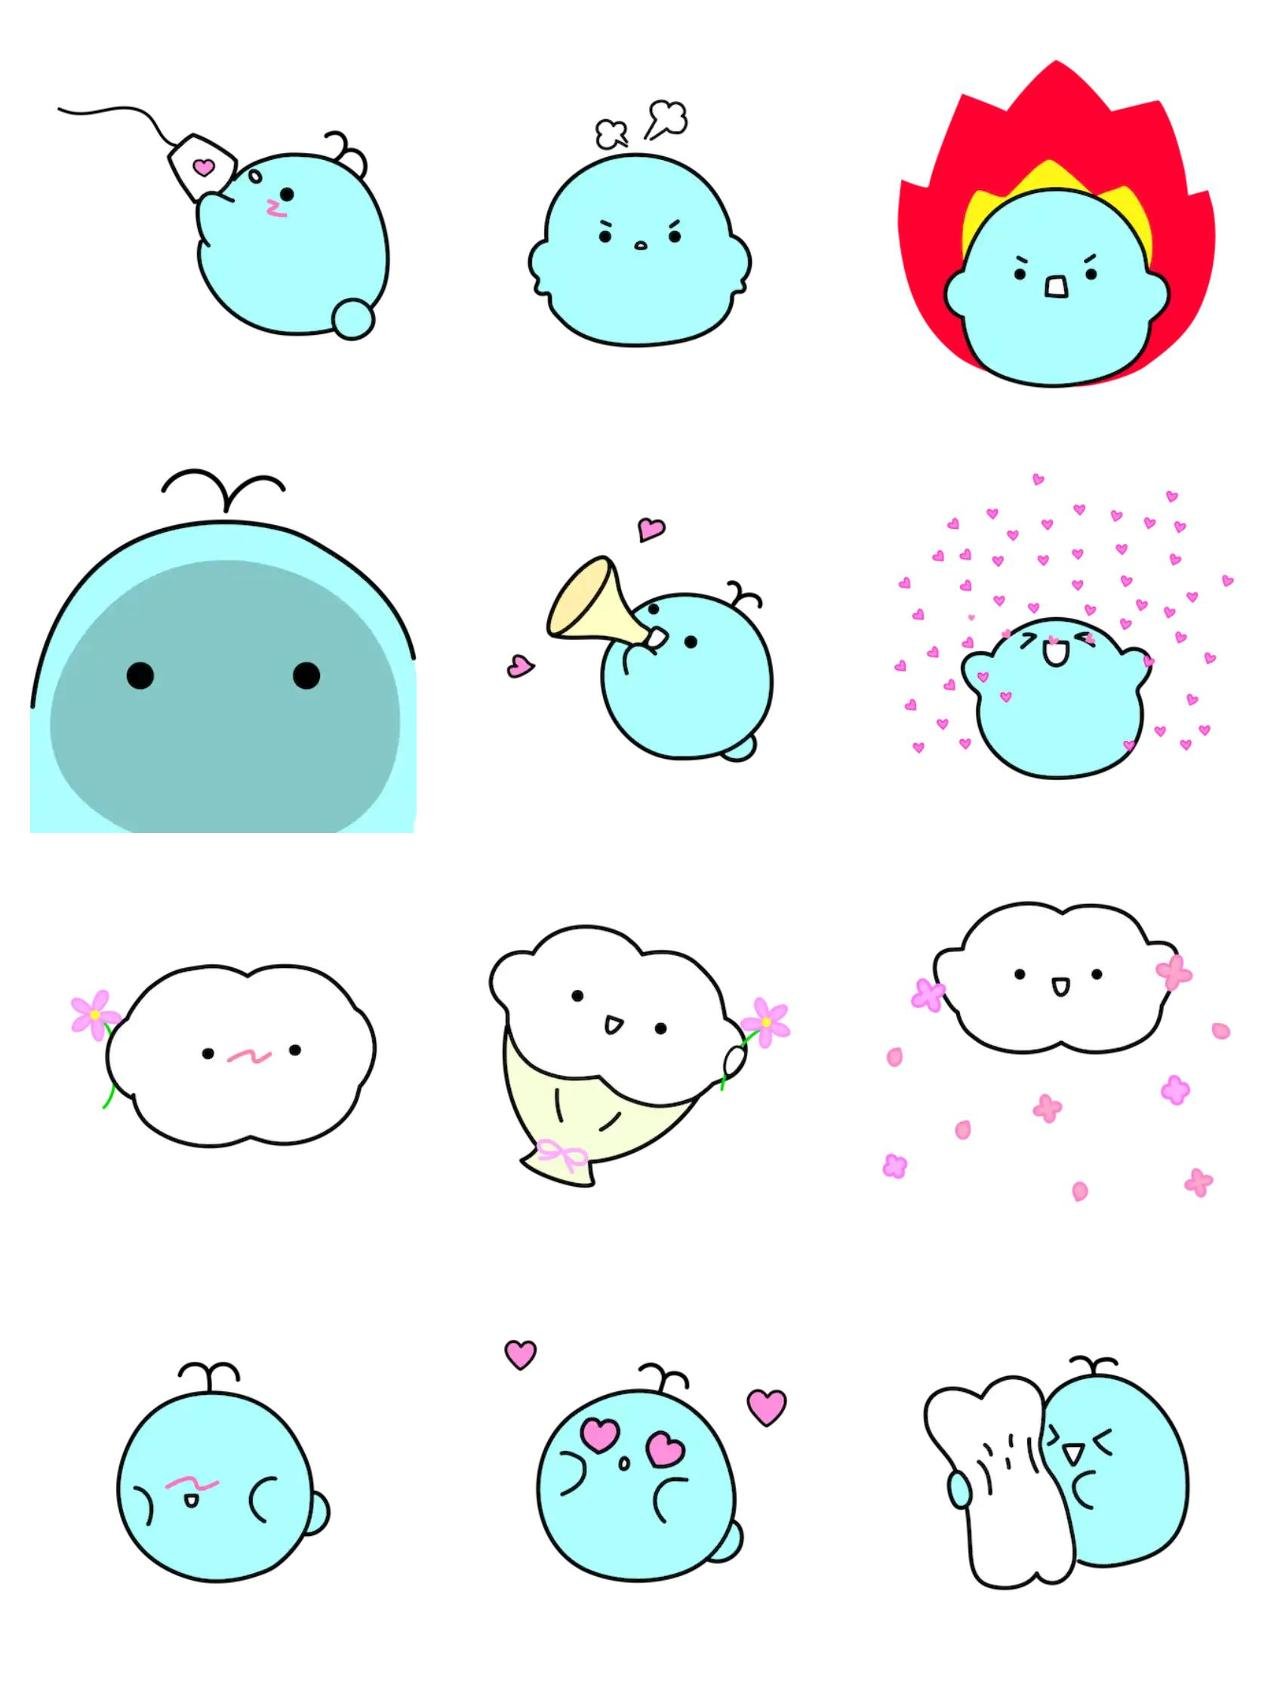 Whale loves cloud 2 Animals,Romance sticker pack for Whatsapp, Telegram, Signal, and others chatting and message apps